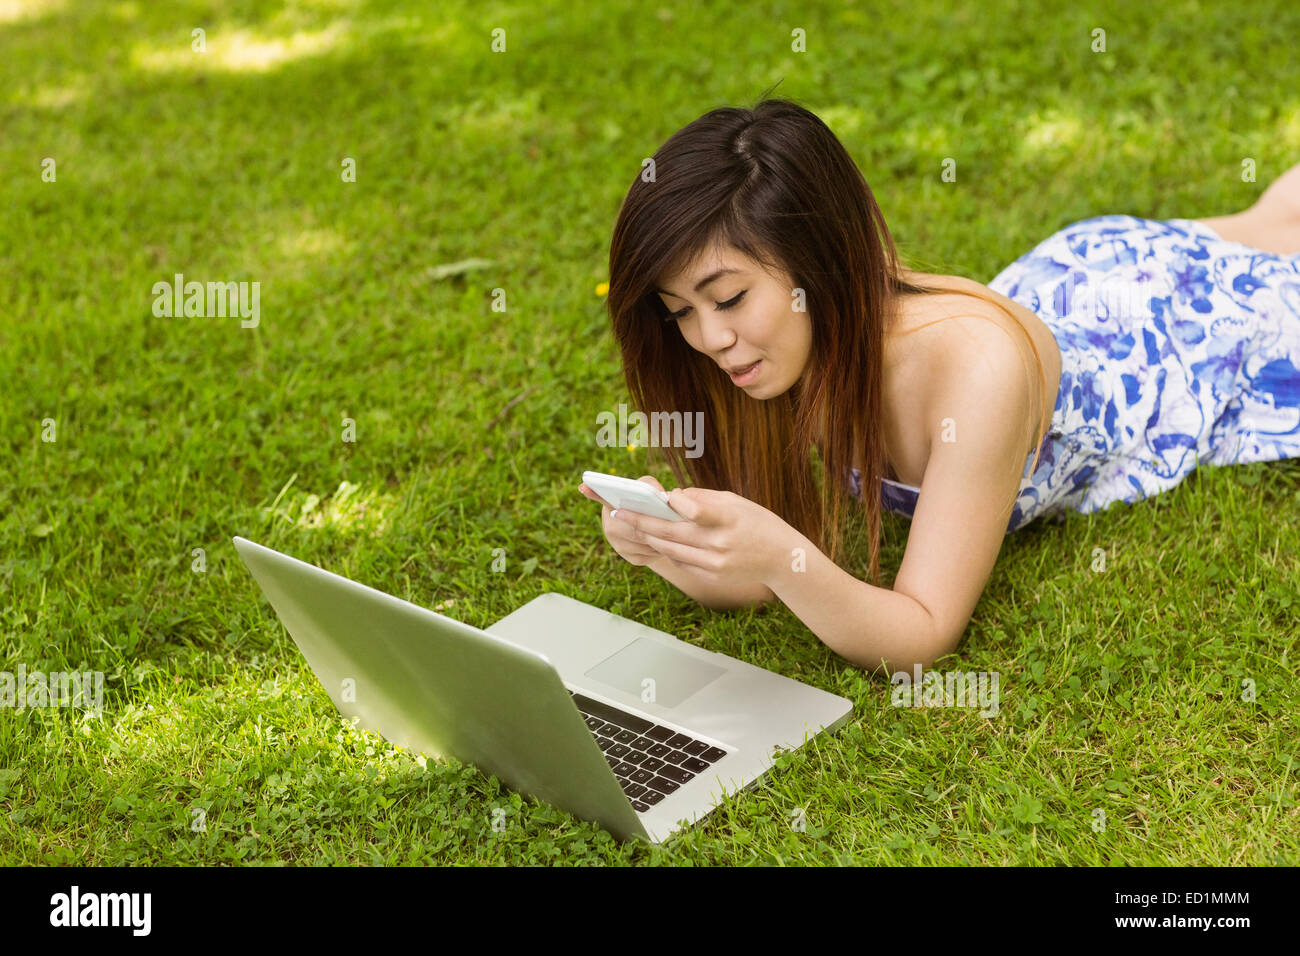 Beautiful woman text messaging in park Stock Photo